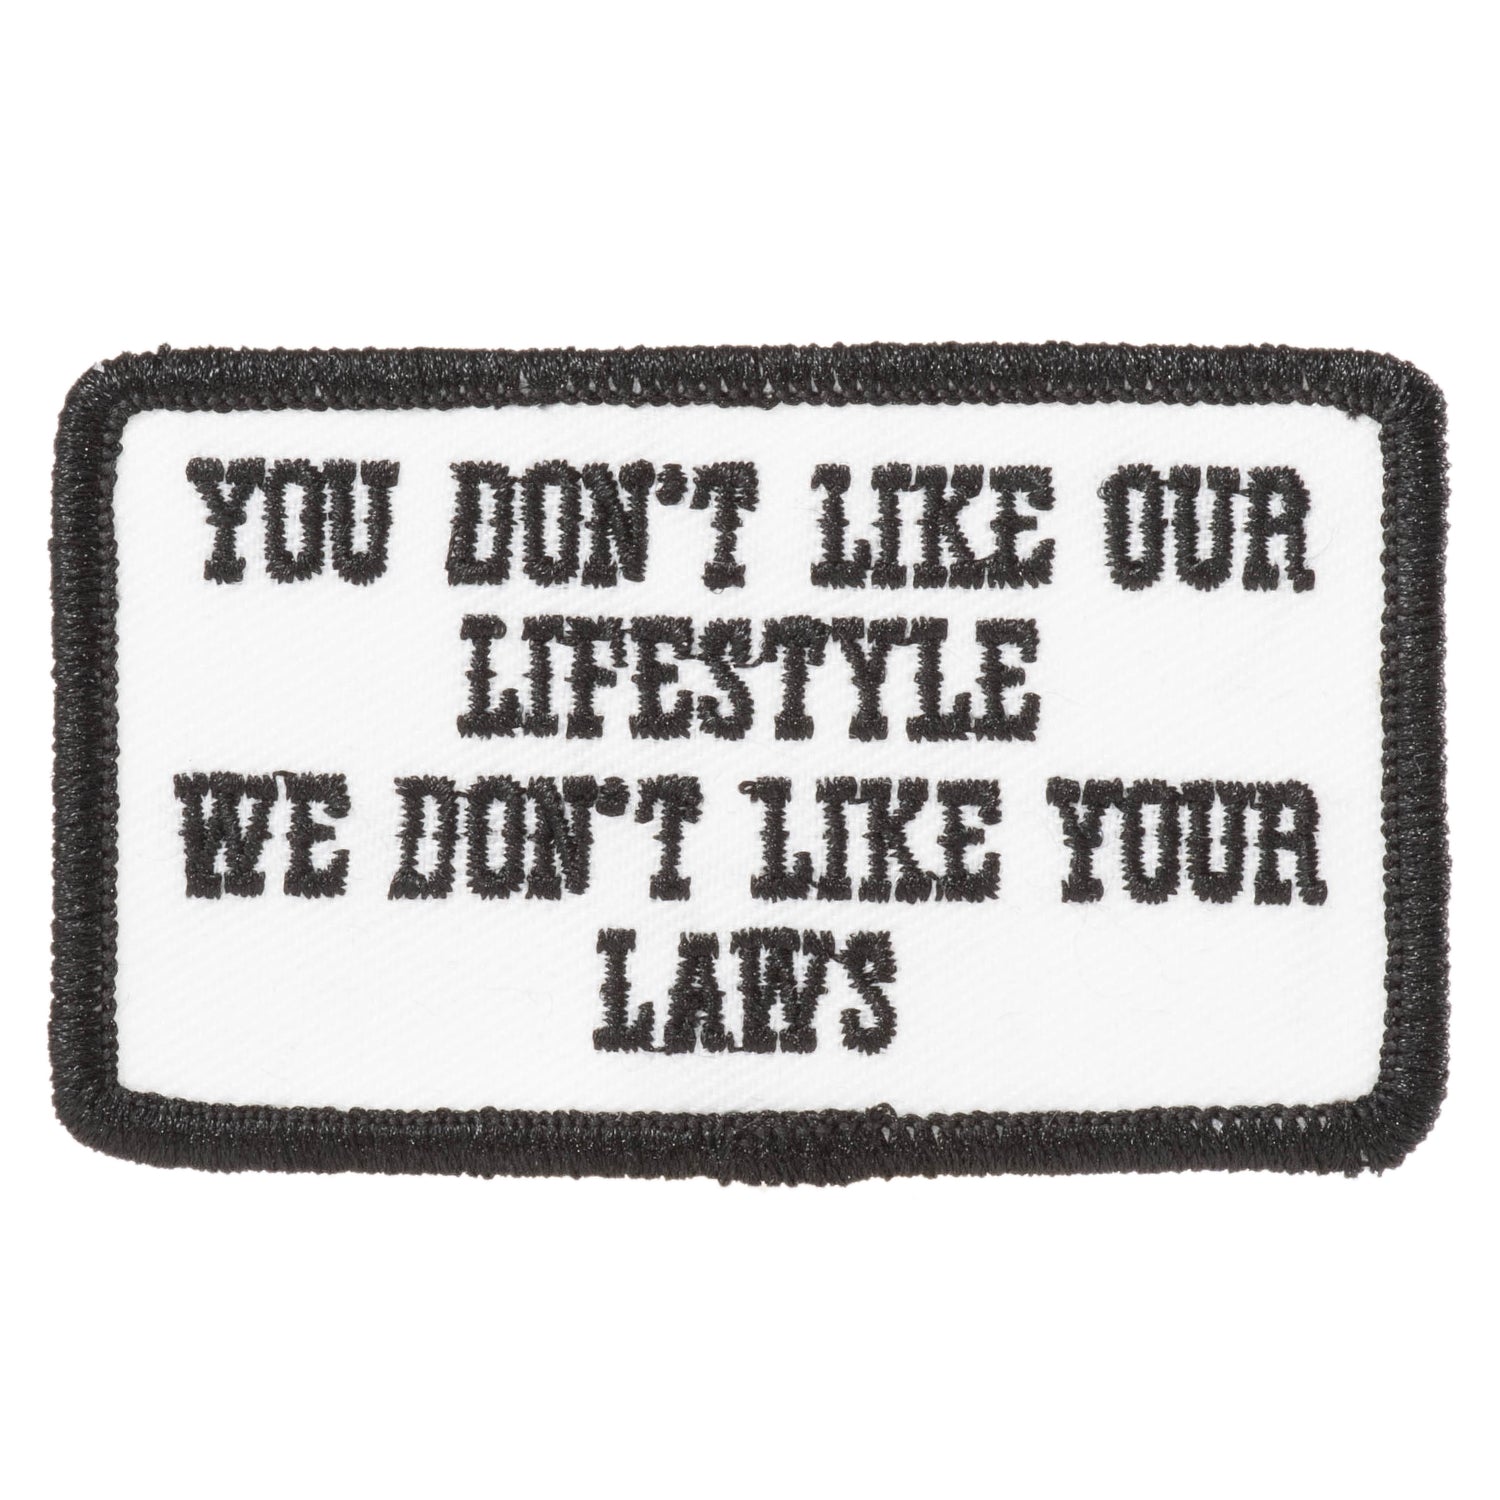 BIKE JERKS You Don't Like Our Lifestyle Patch